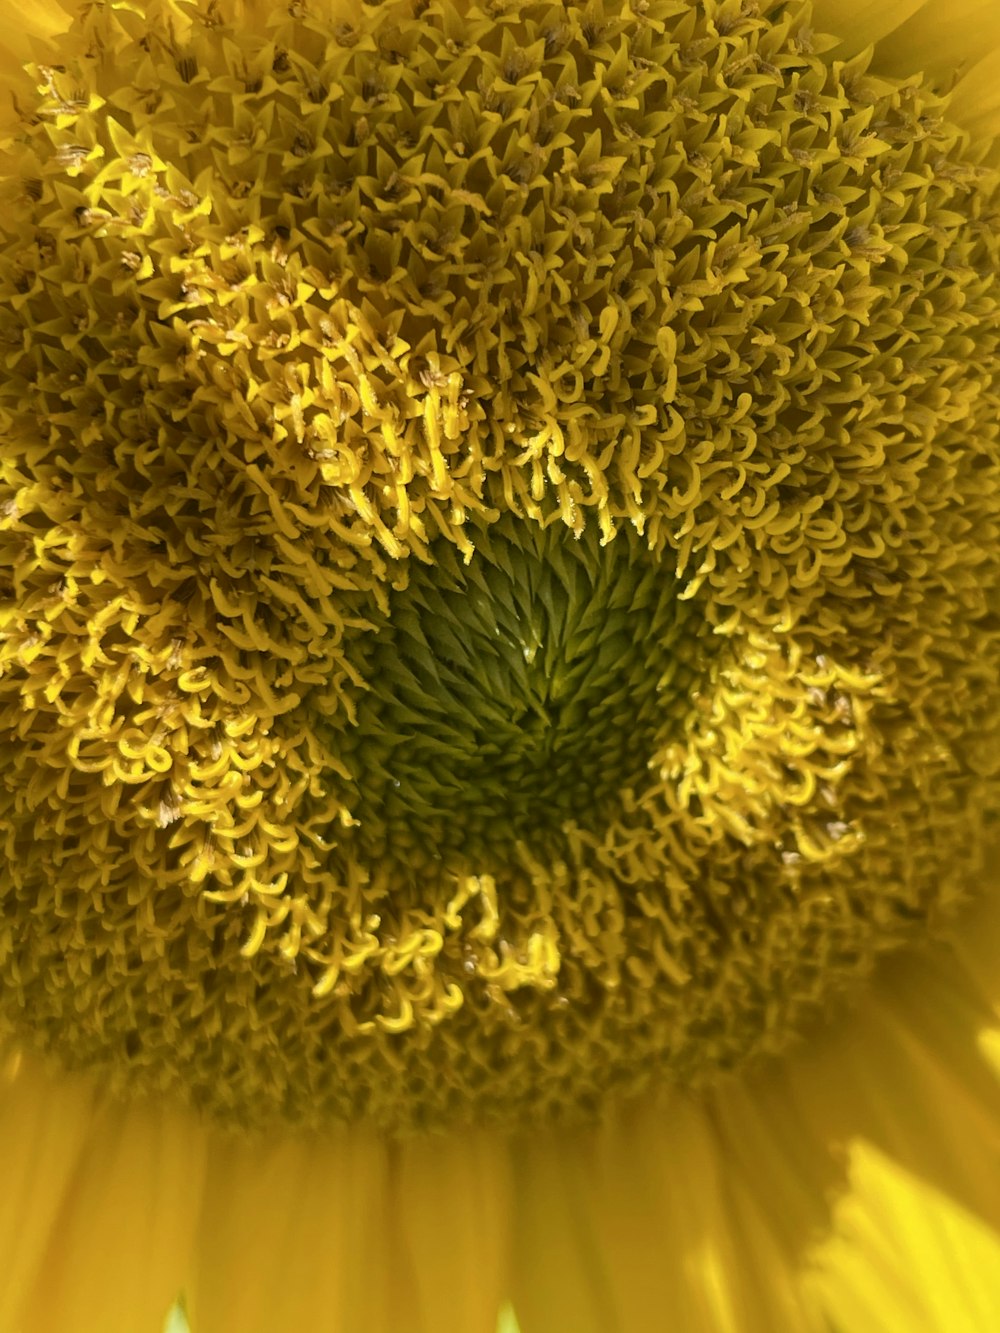 a close up of a large yellow sunflower